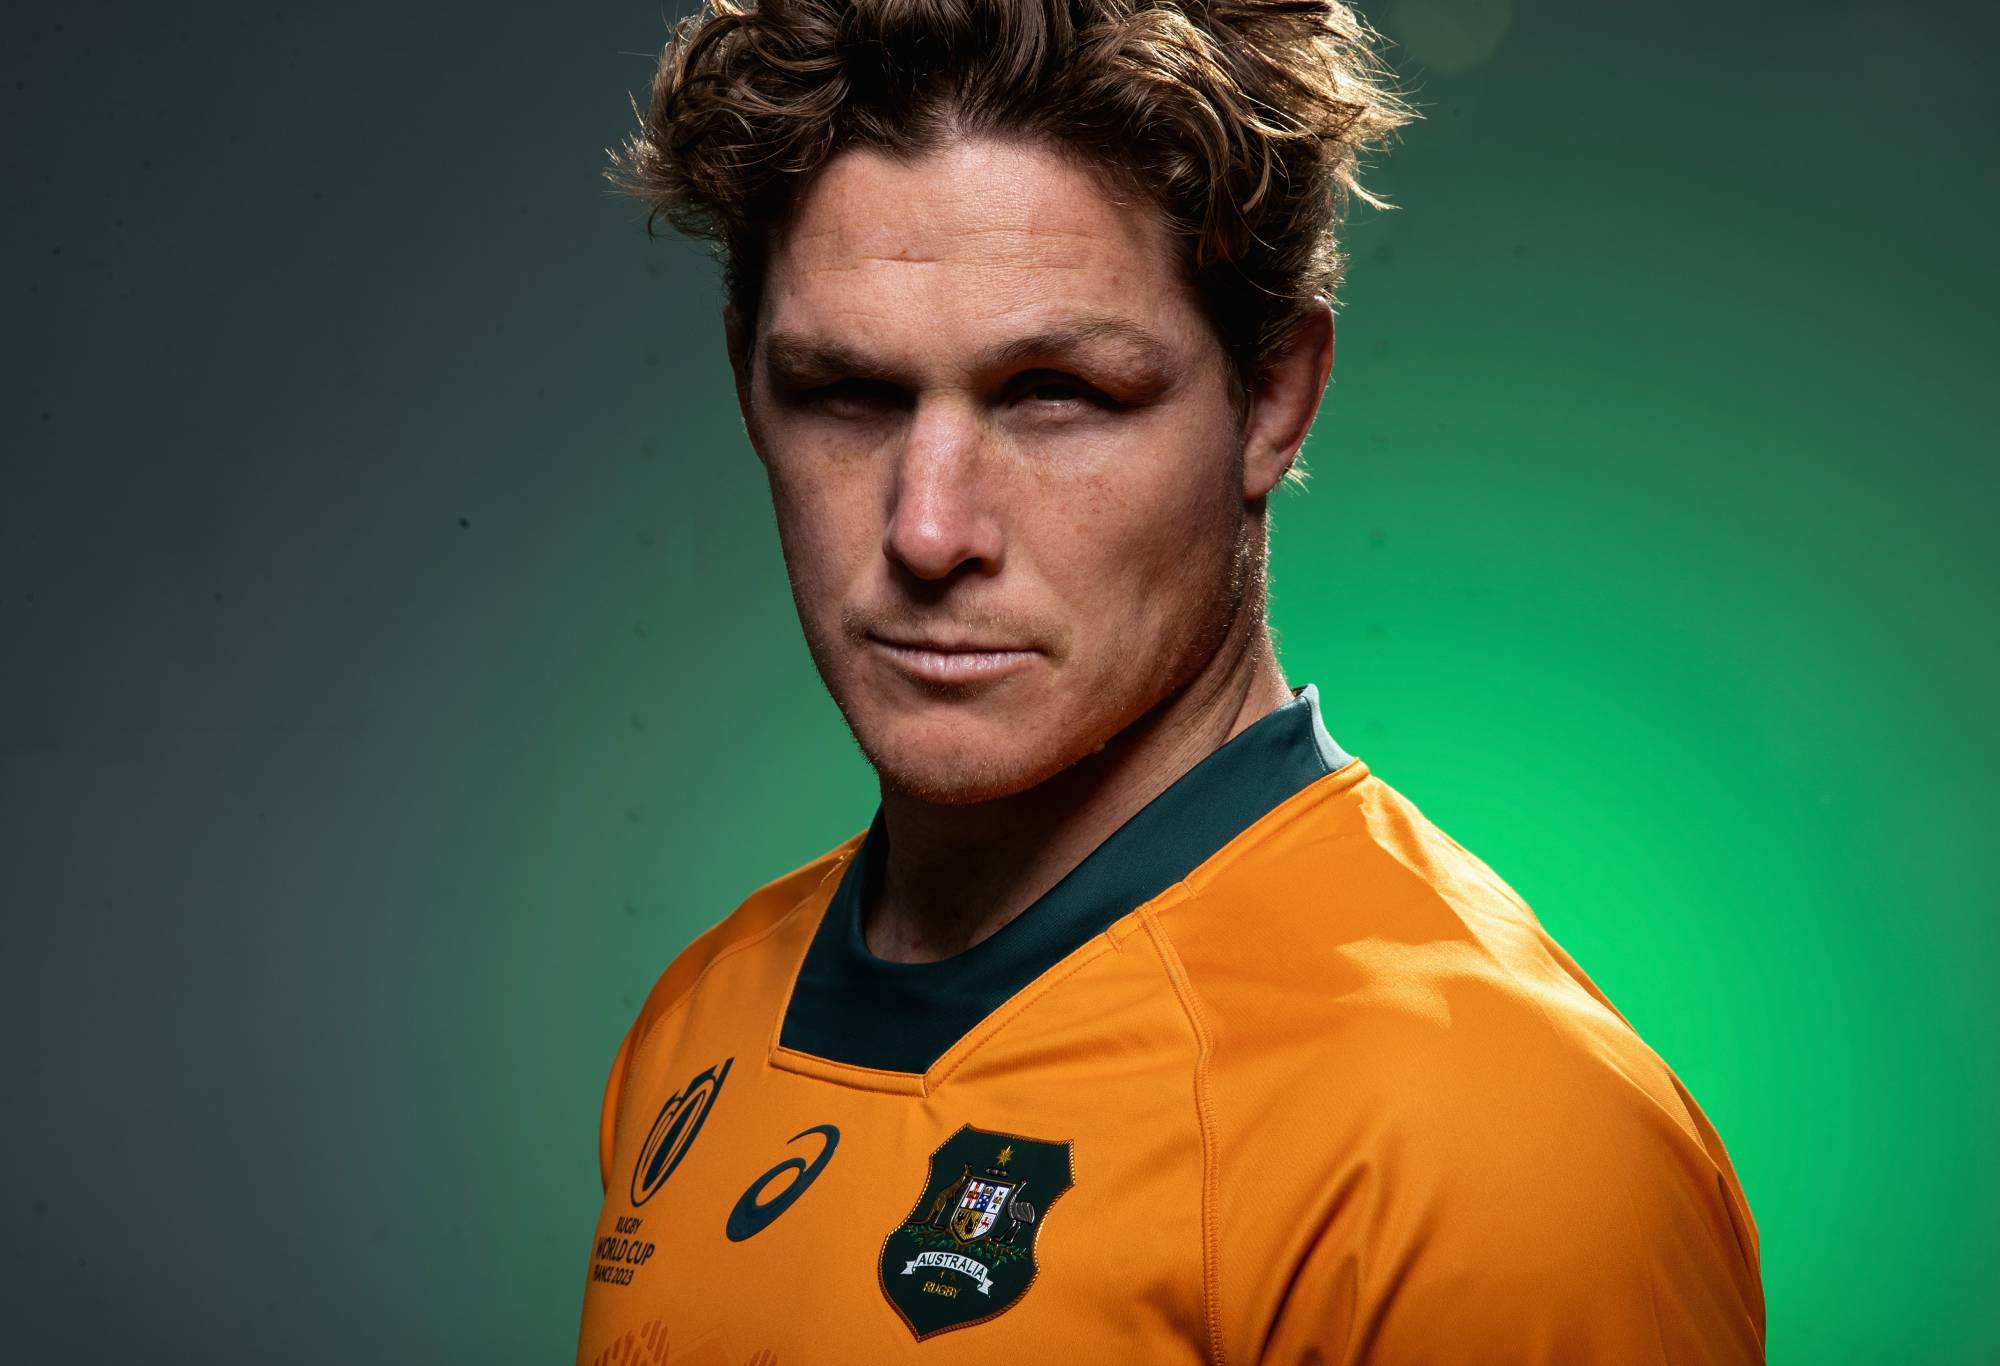 Michael Hooper of the Wallabies poses for a portrait following a Rugby Australia media opportunity launching the Wallabies 2023 Rugby World Cup jersey, at Coogee Oval on June 22, 2023 in Sydney, Australia. (Photo by Cameron Spencer/Getty Images)